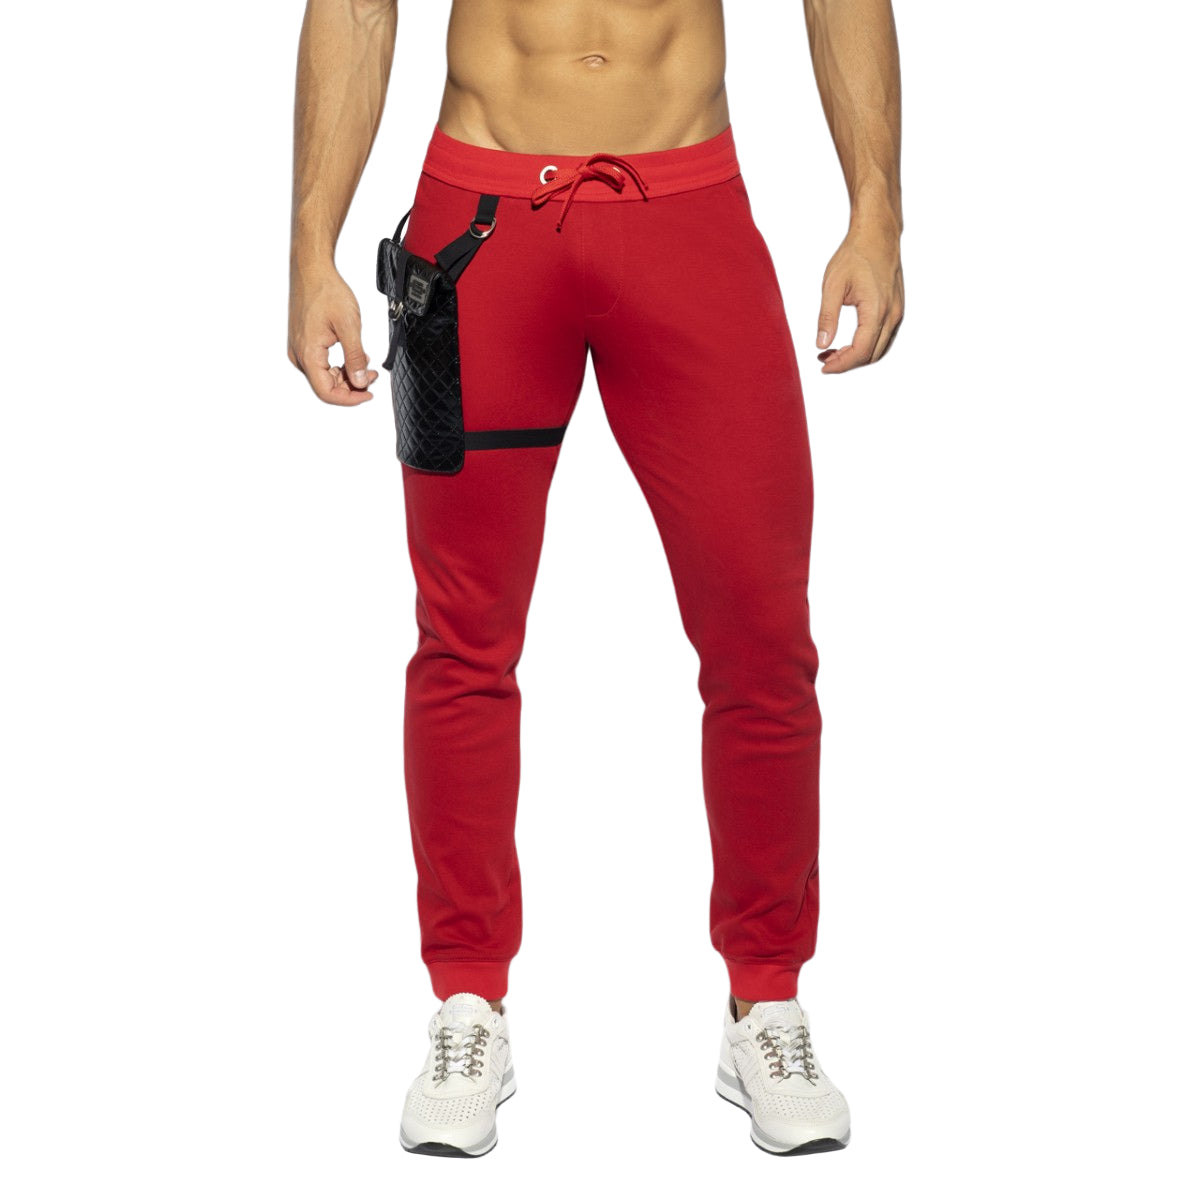 ES Collection Removable Pocket Sports Pants Red SP285